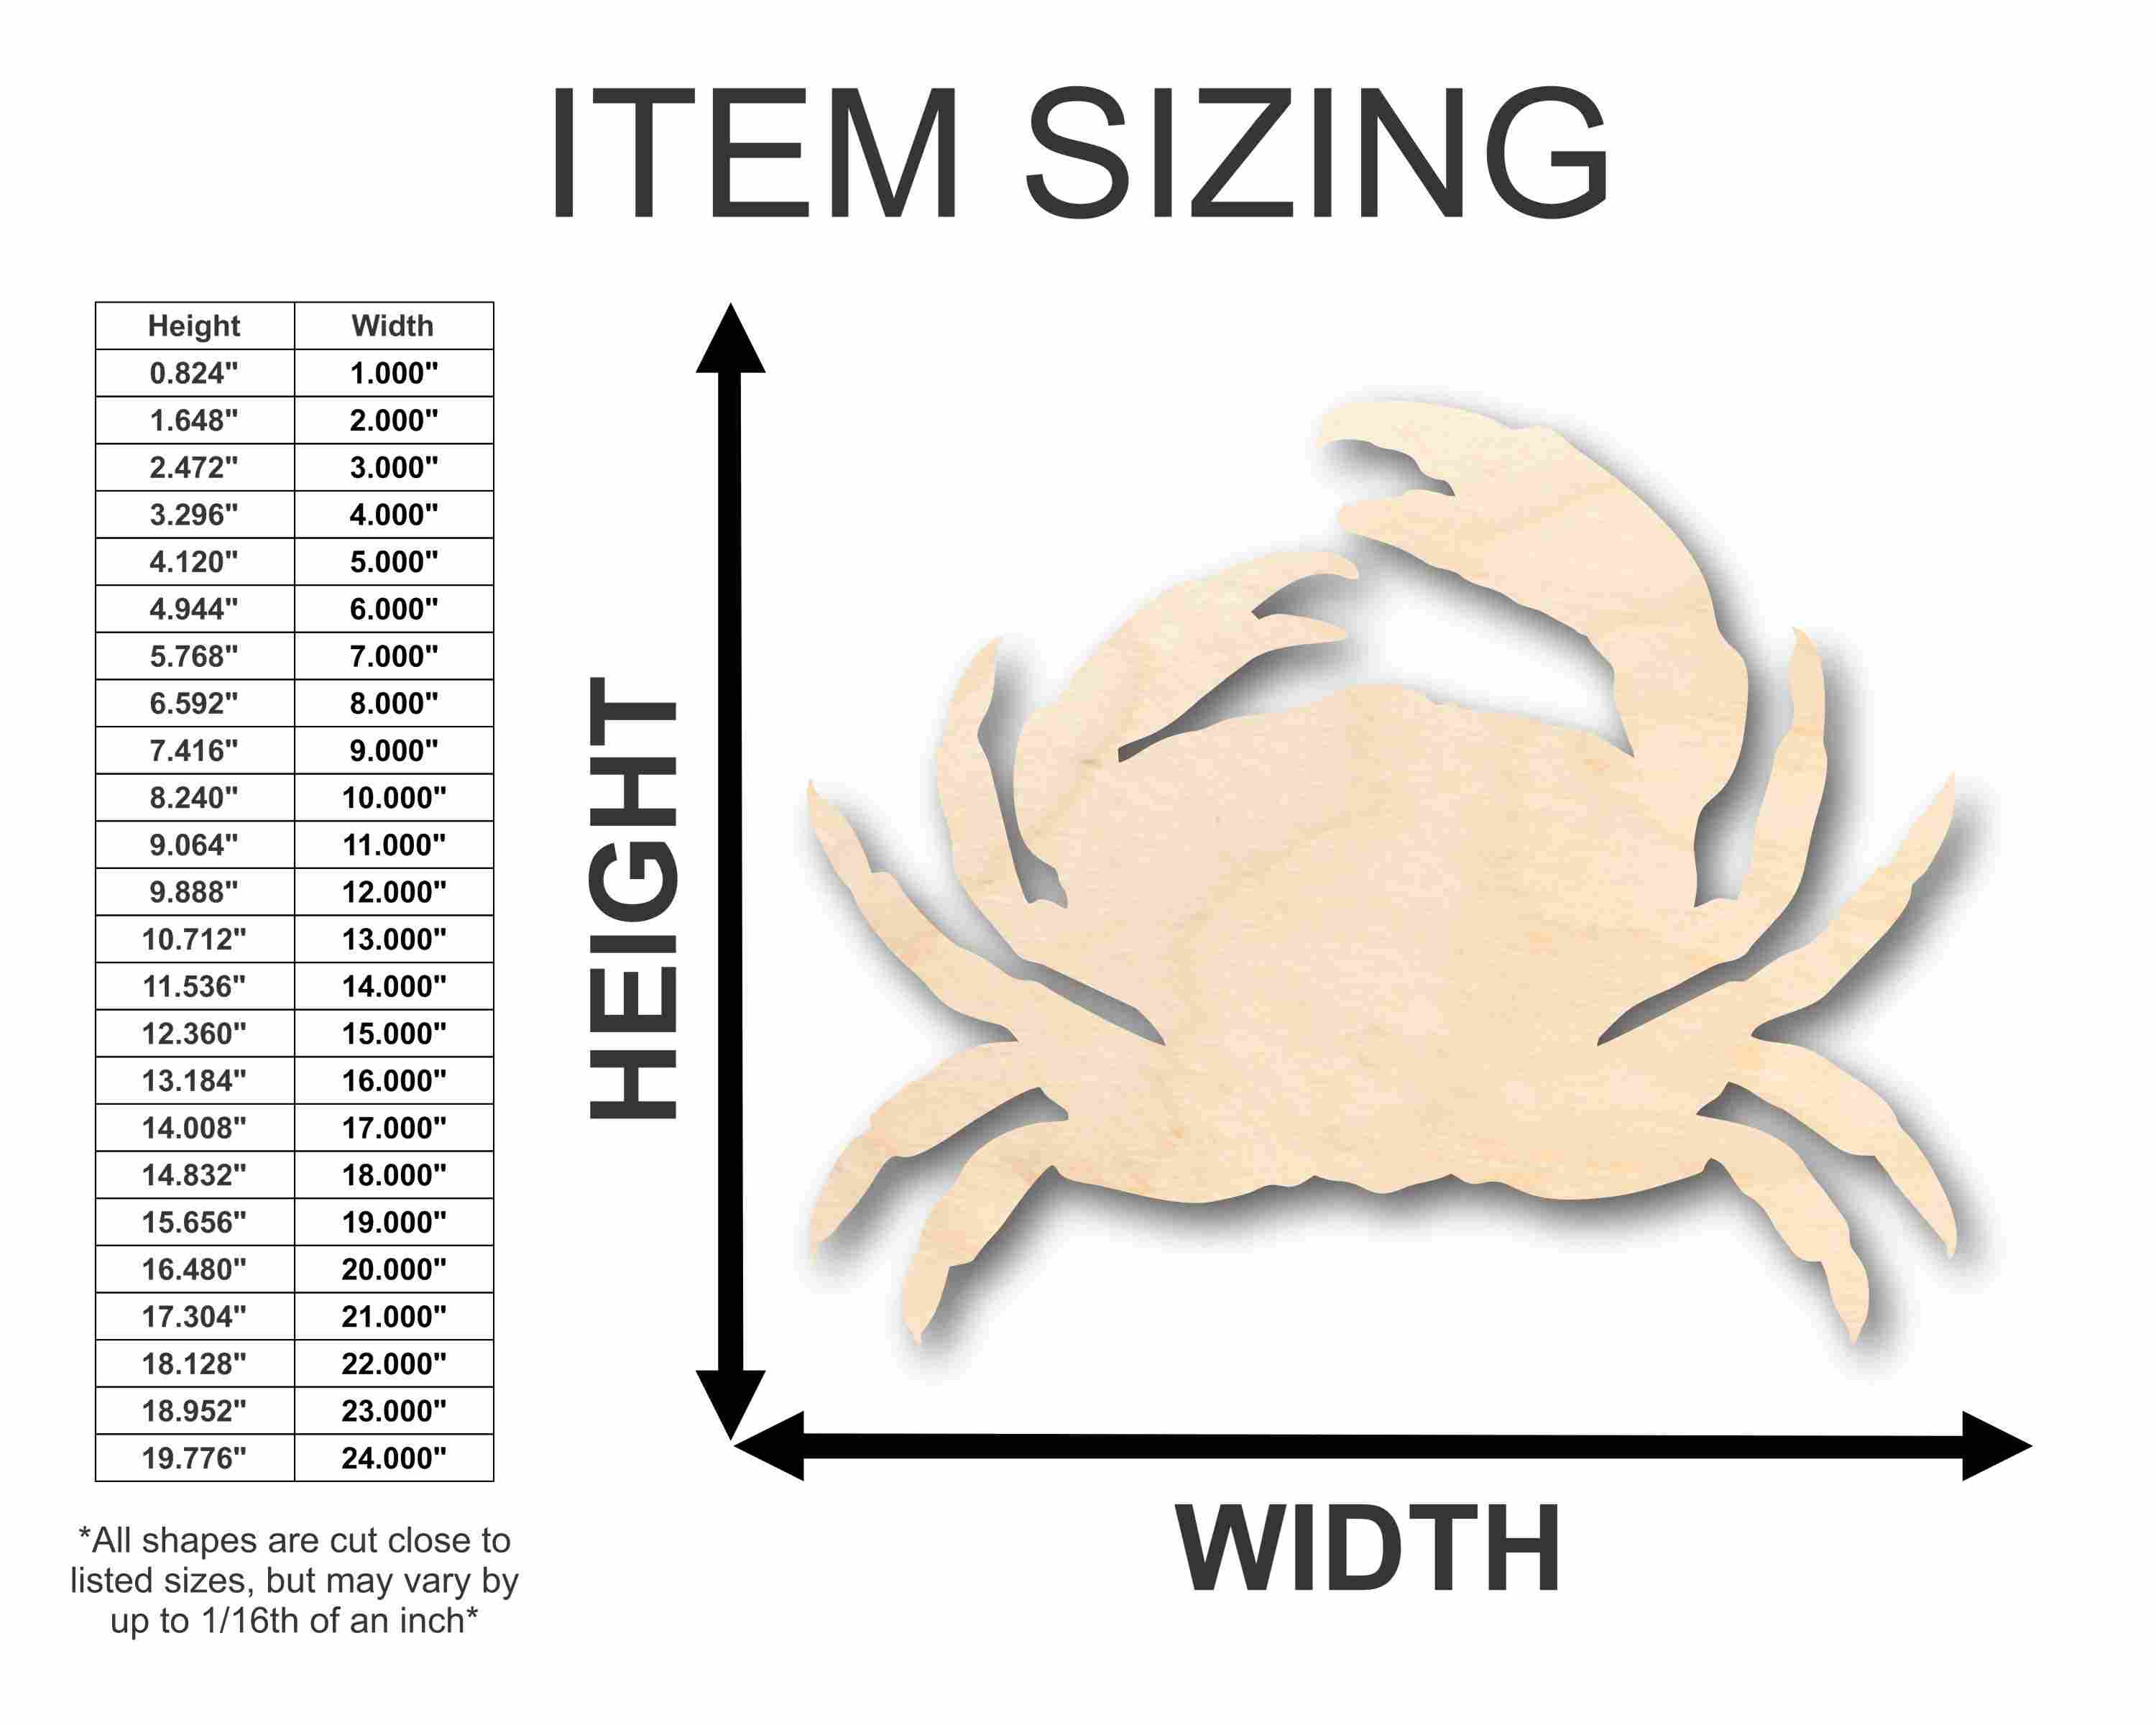 Unfinished Wood Crab Silhouette - Craft- up to 24